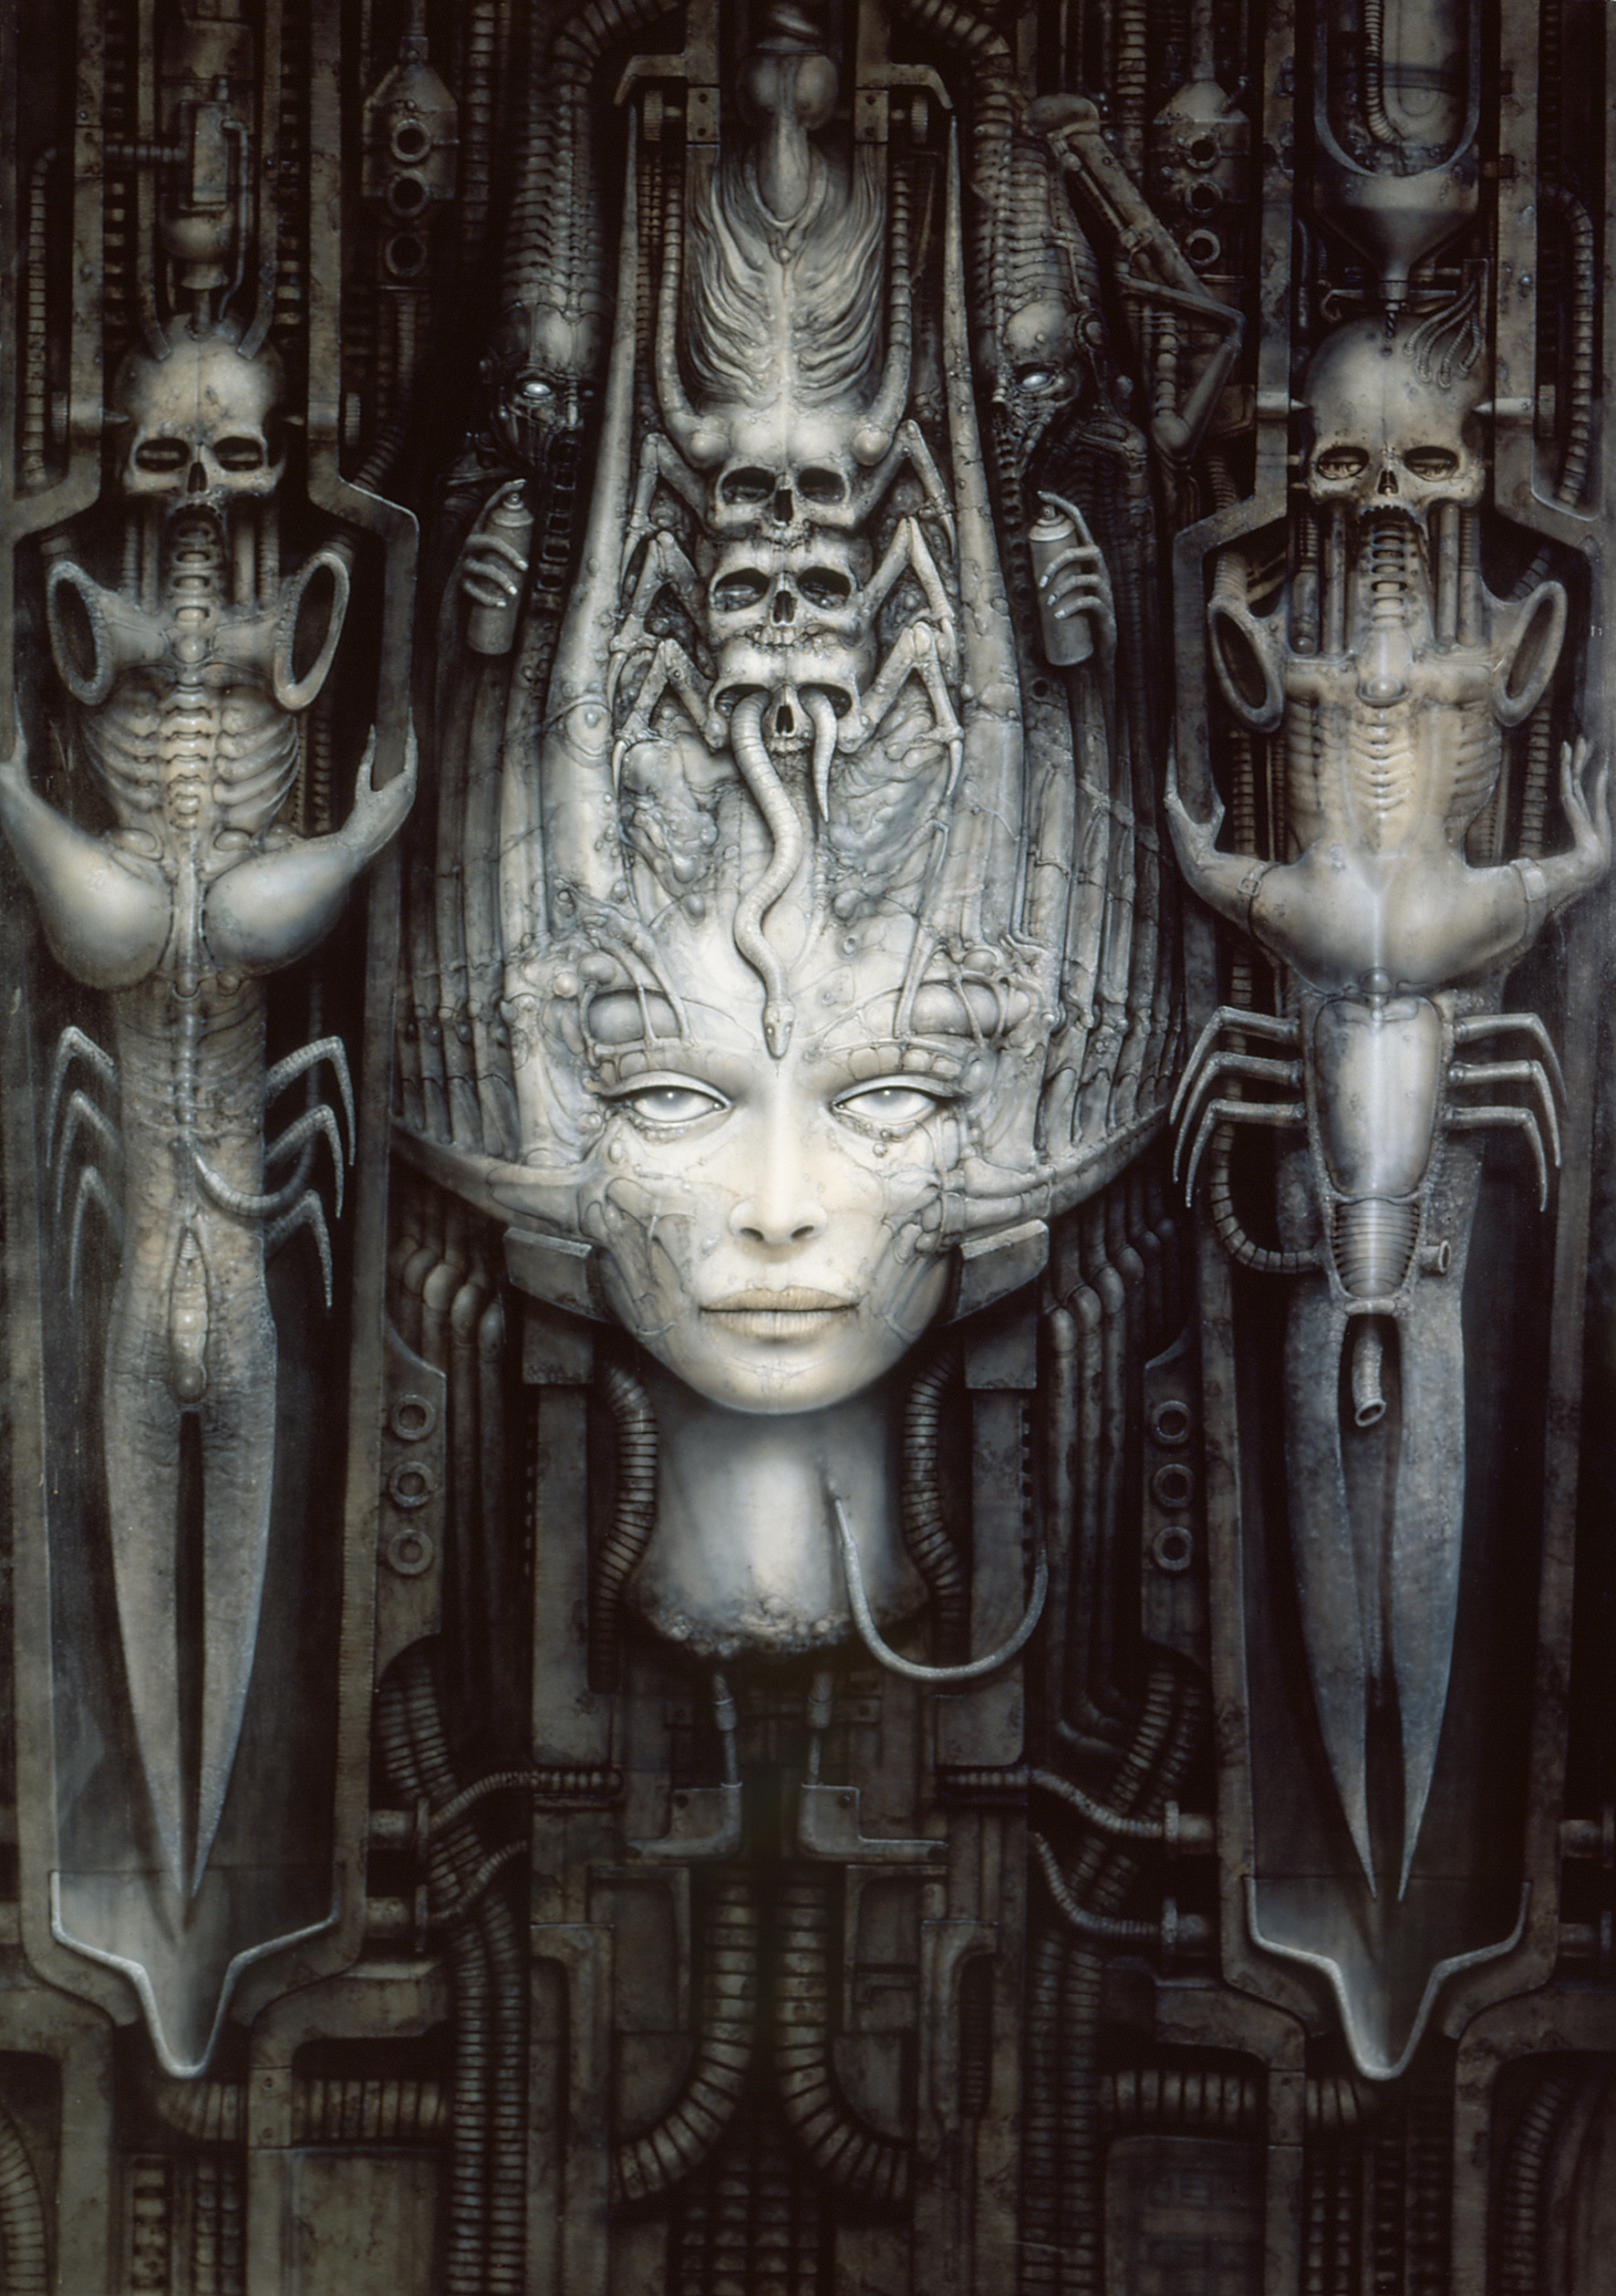 The Most Unforgettable Creations of H. R. Giger HR Giger, Giger art and Art google